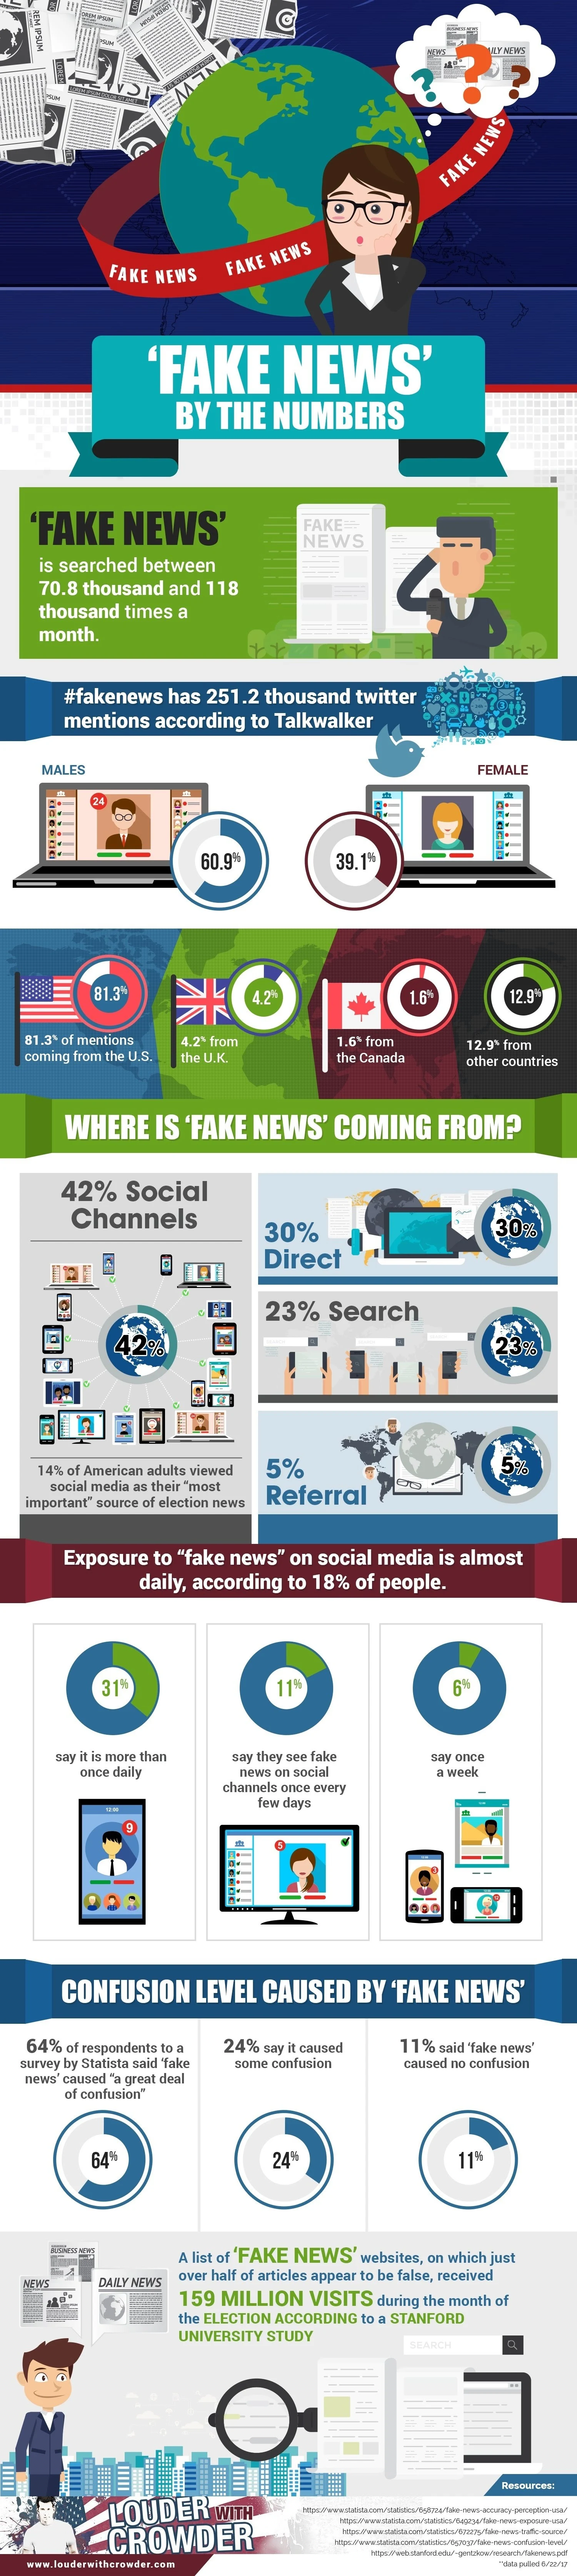 This infographic from illustrates the key statistics and survey results on how the public has received, perceived, and responded to fake news they’ve come to encounter in their daily lives.